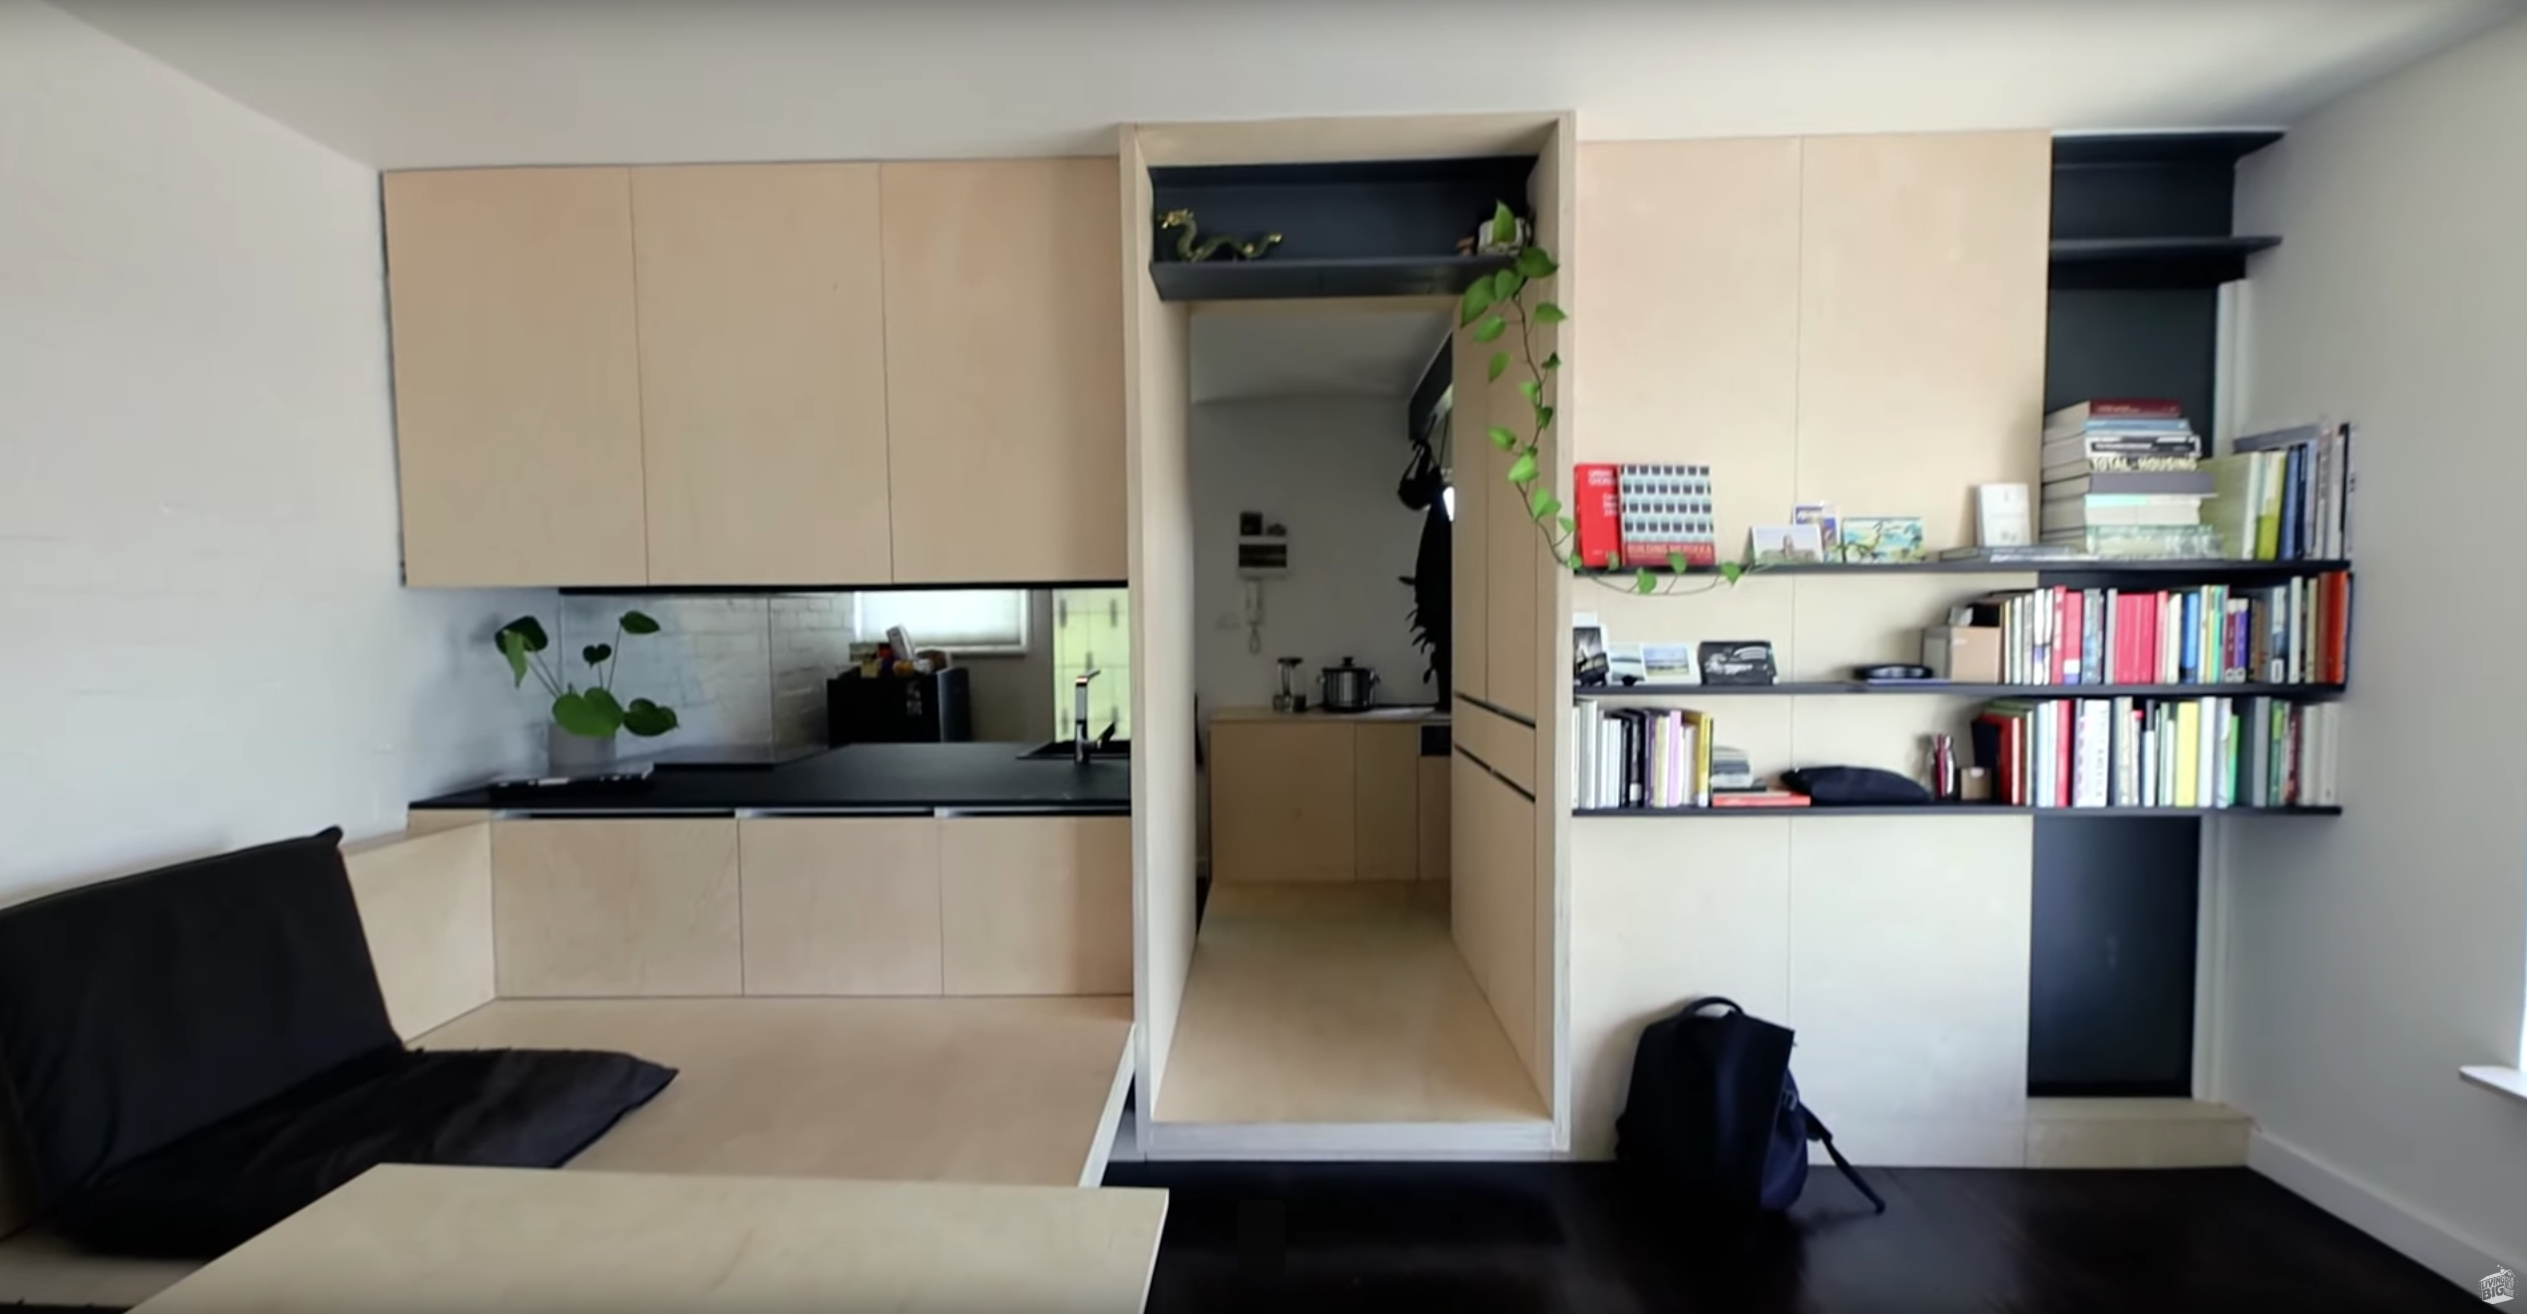 This 300 Square Foot Apartment Makes A Small Space Seem Huge